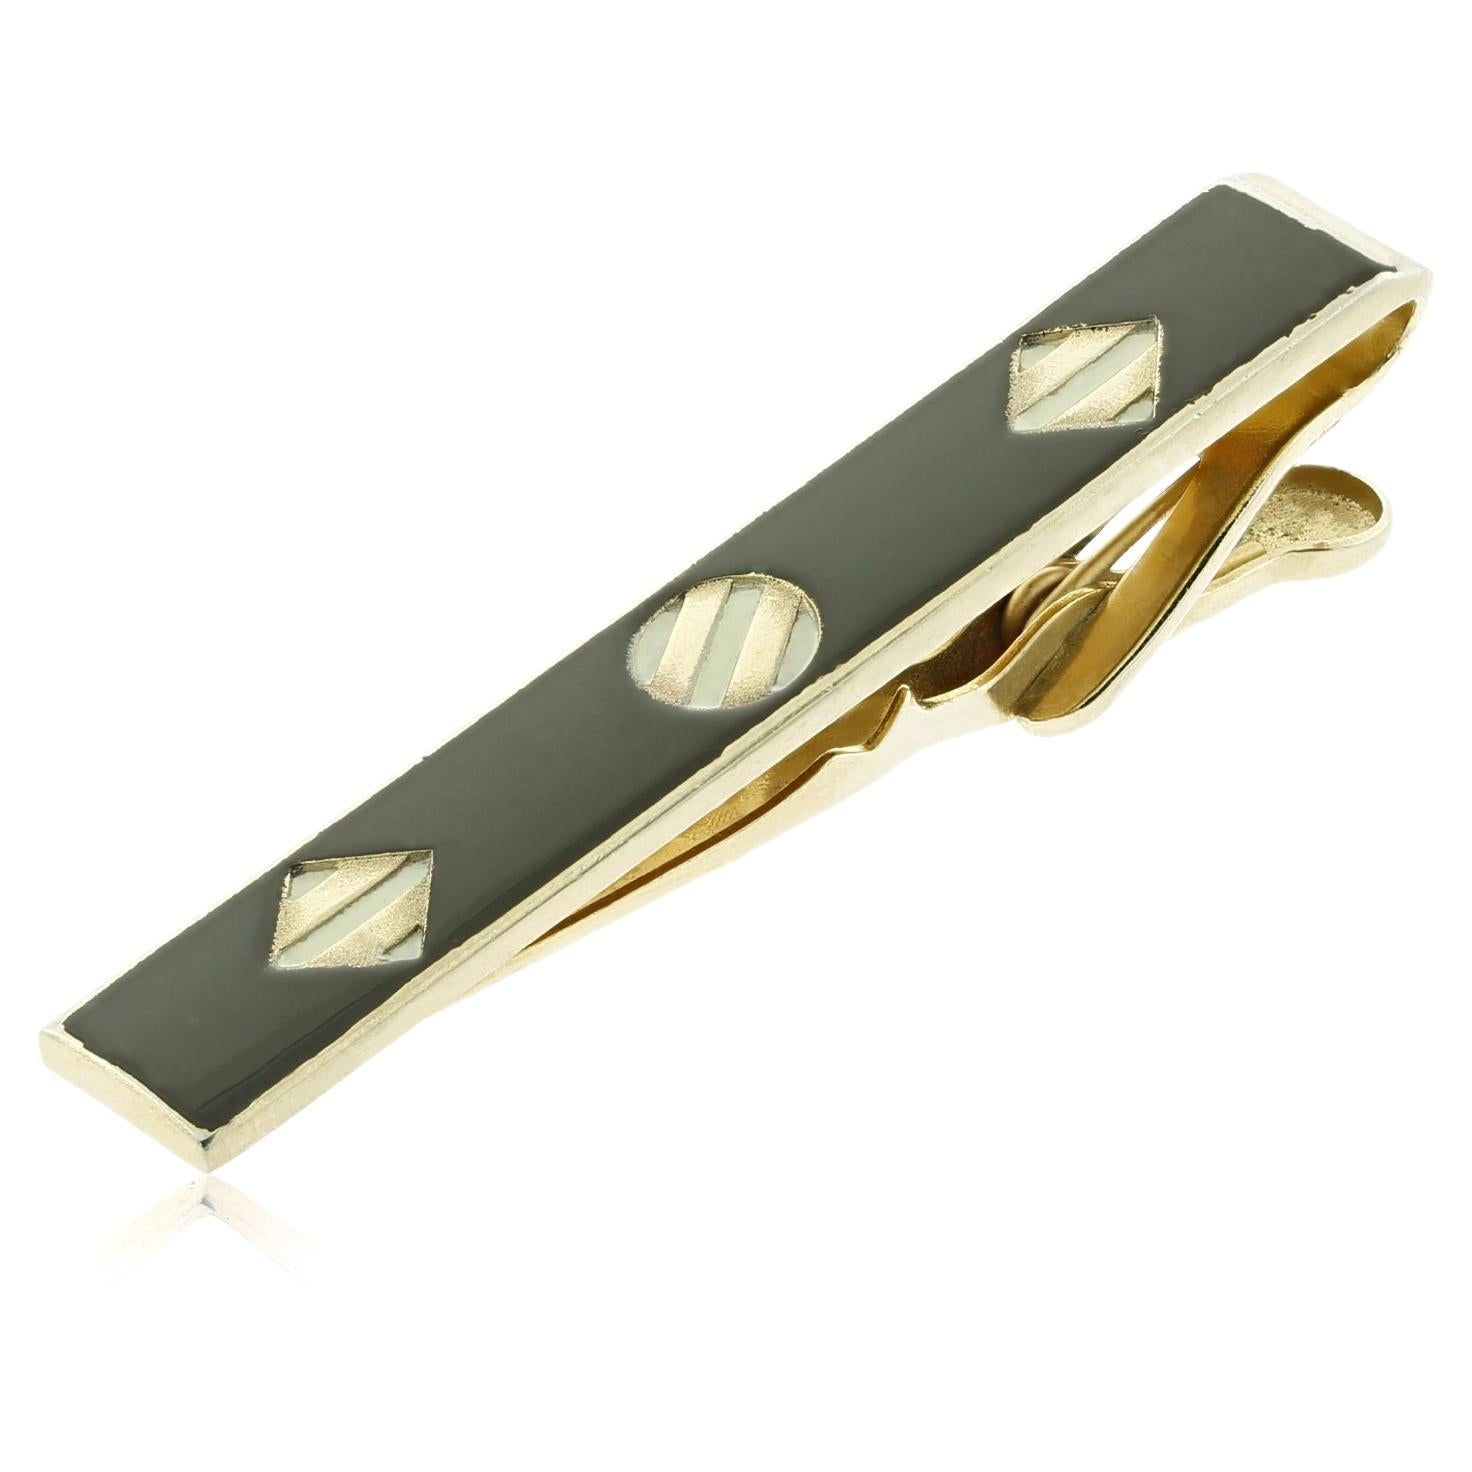 Swank 1960s Art Deco Gold Plated Tie Clip